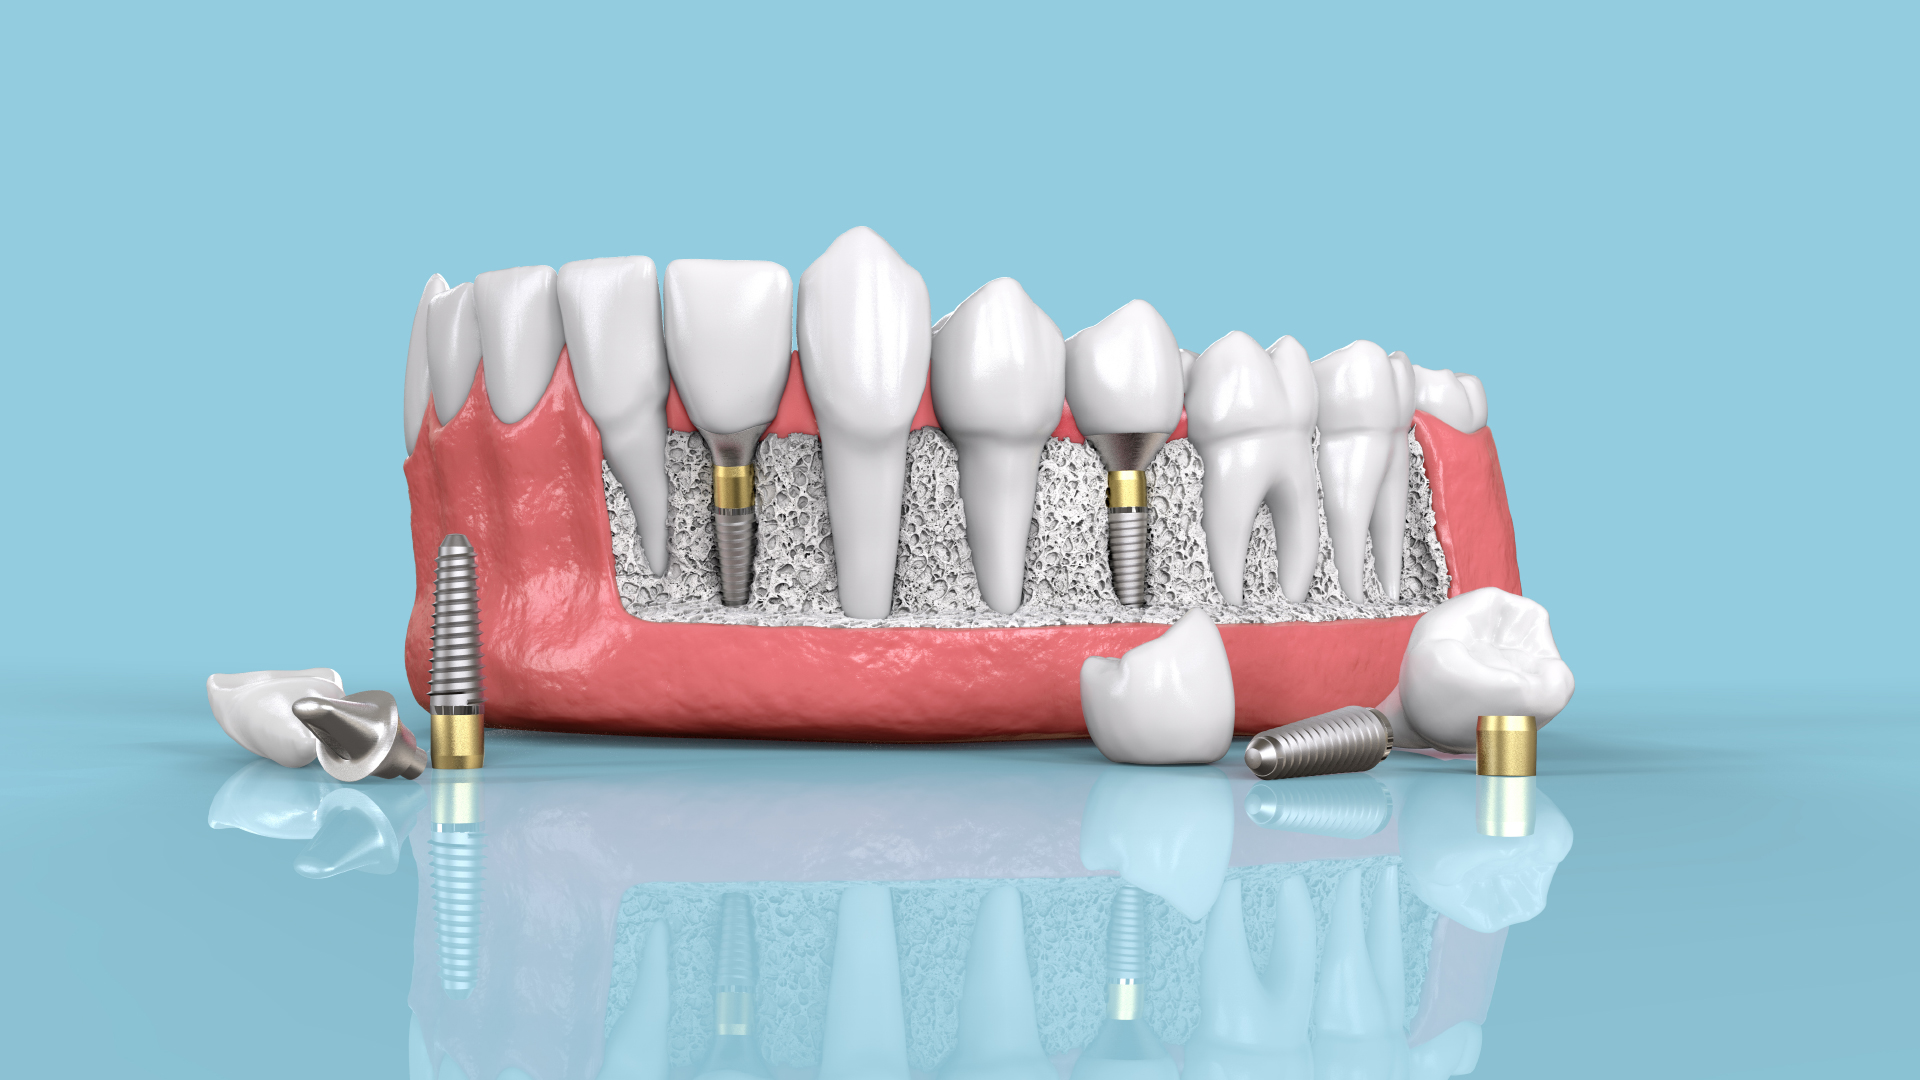 Dental Implants : types, surgery procedure, and cost